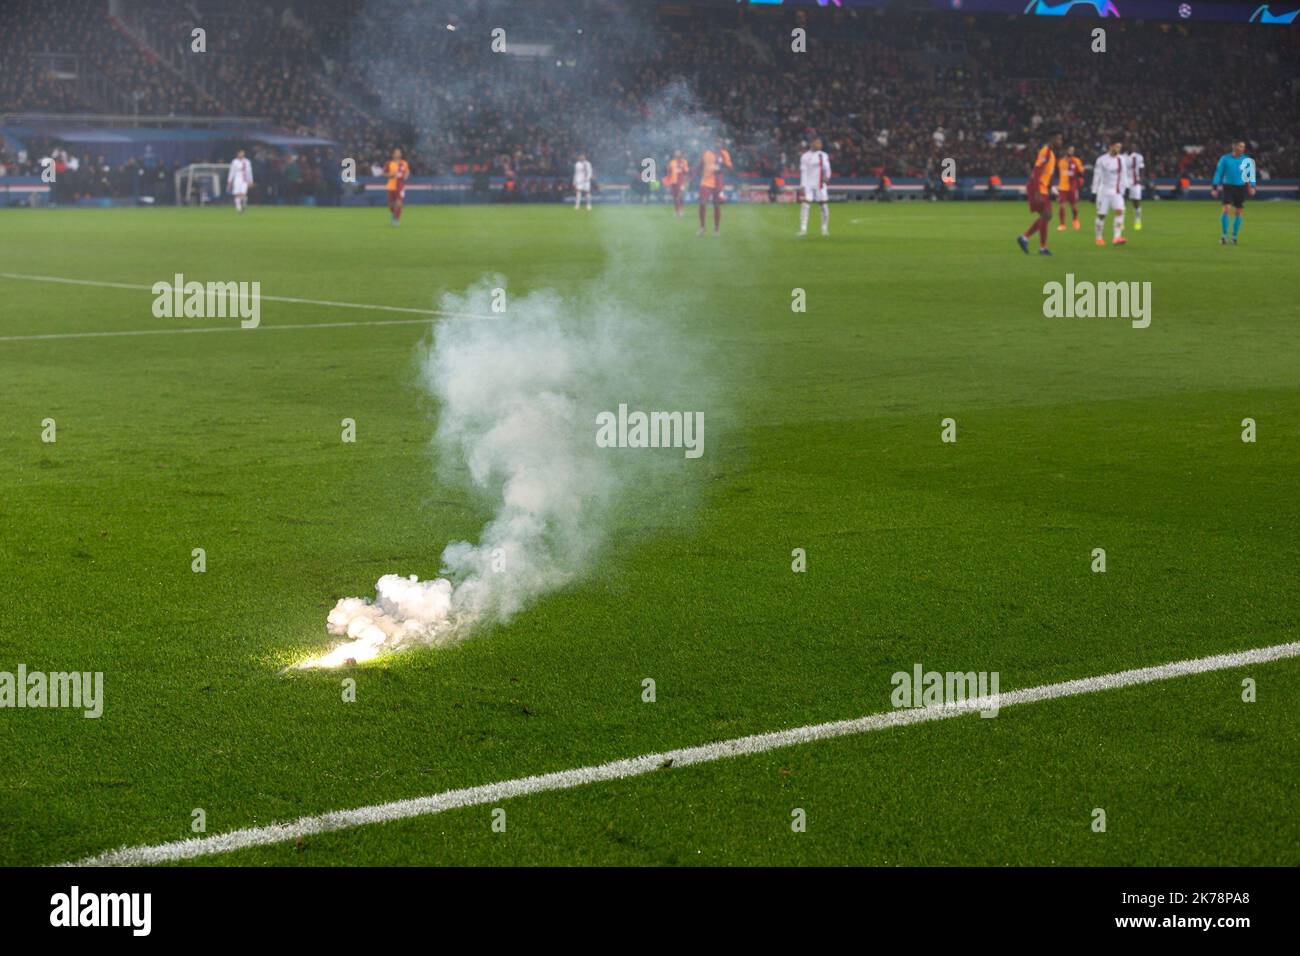 Flares are thrown onto the pitch during the game Stock Photo